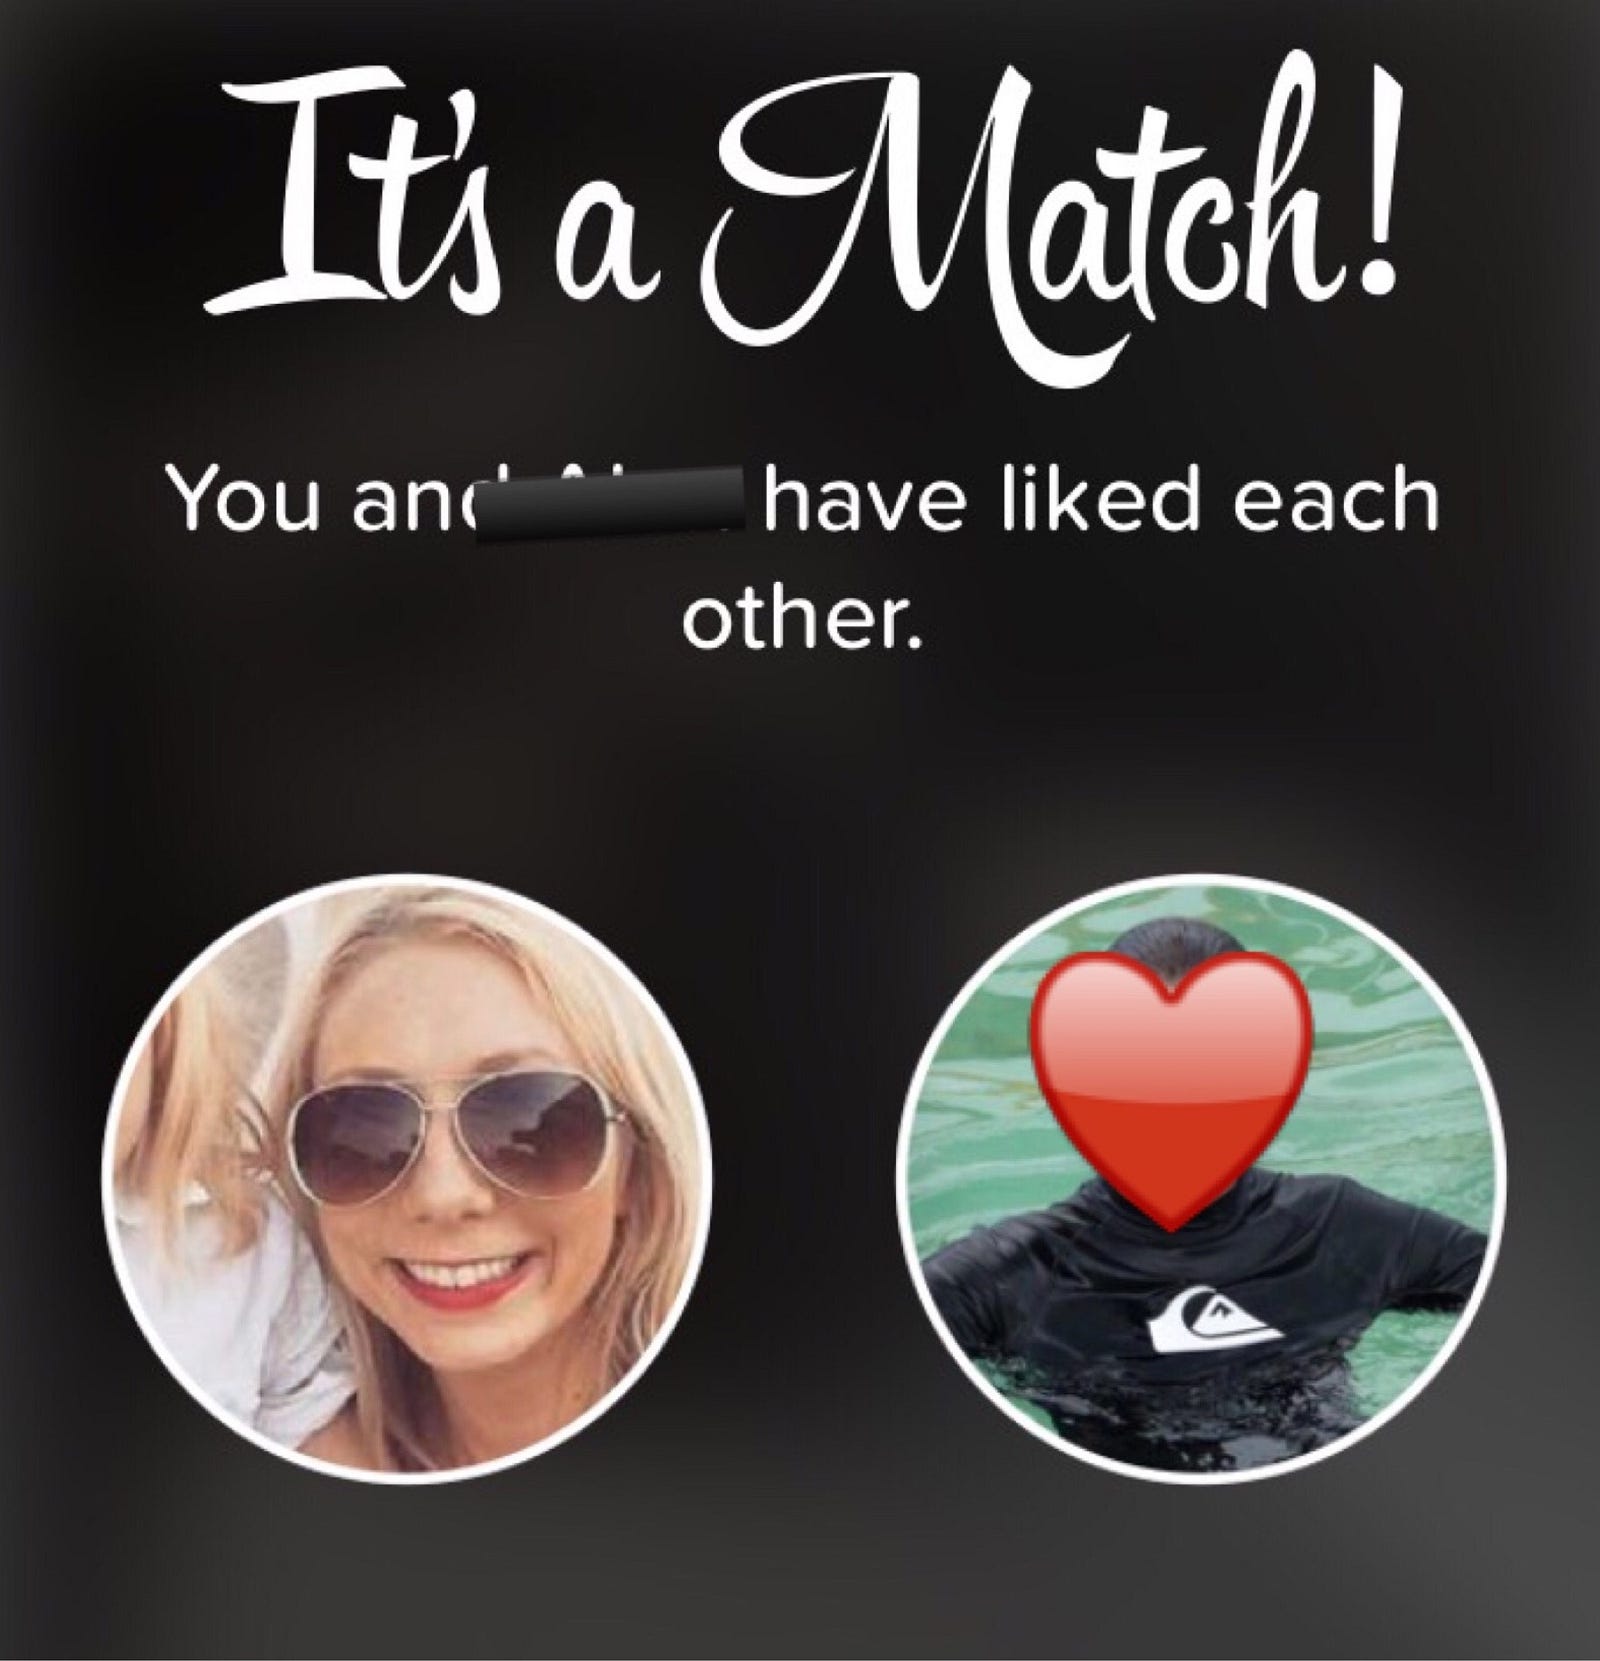 Dating multiple guys on tinder